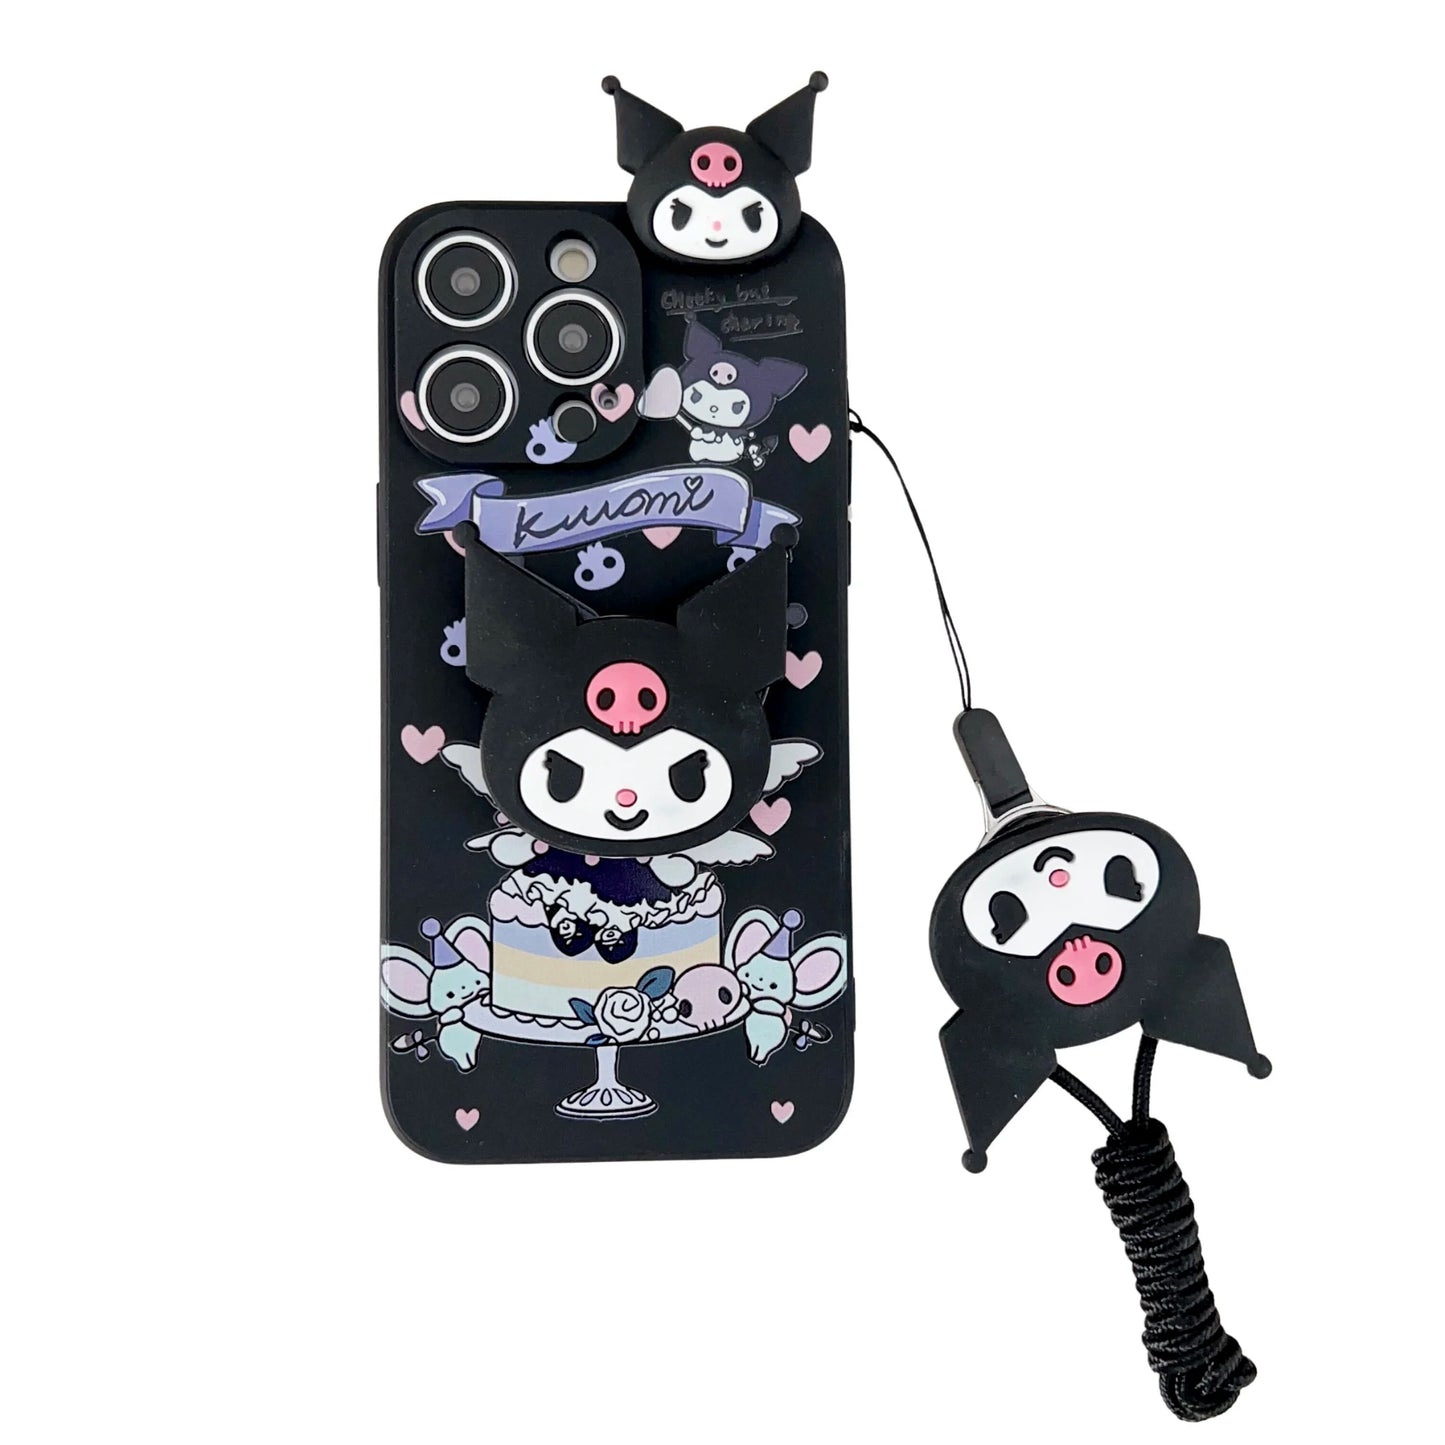 Cute Kuromi Case with Holder Rope | For iPhone 6, 6s, 7, 8, X, XS Max, XR, 11, 12, 13, 14, 15 Pro SE Max ShopOnlyDeal